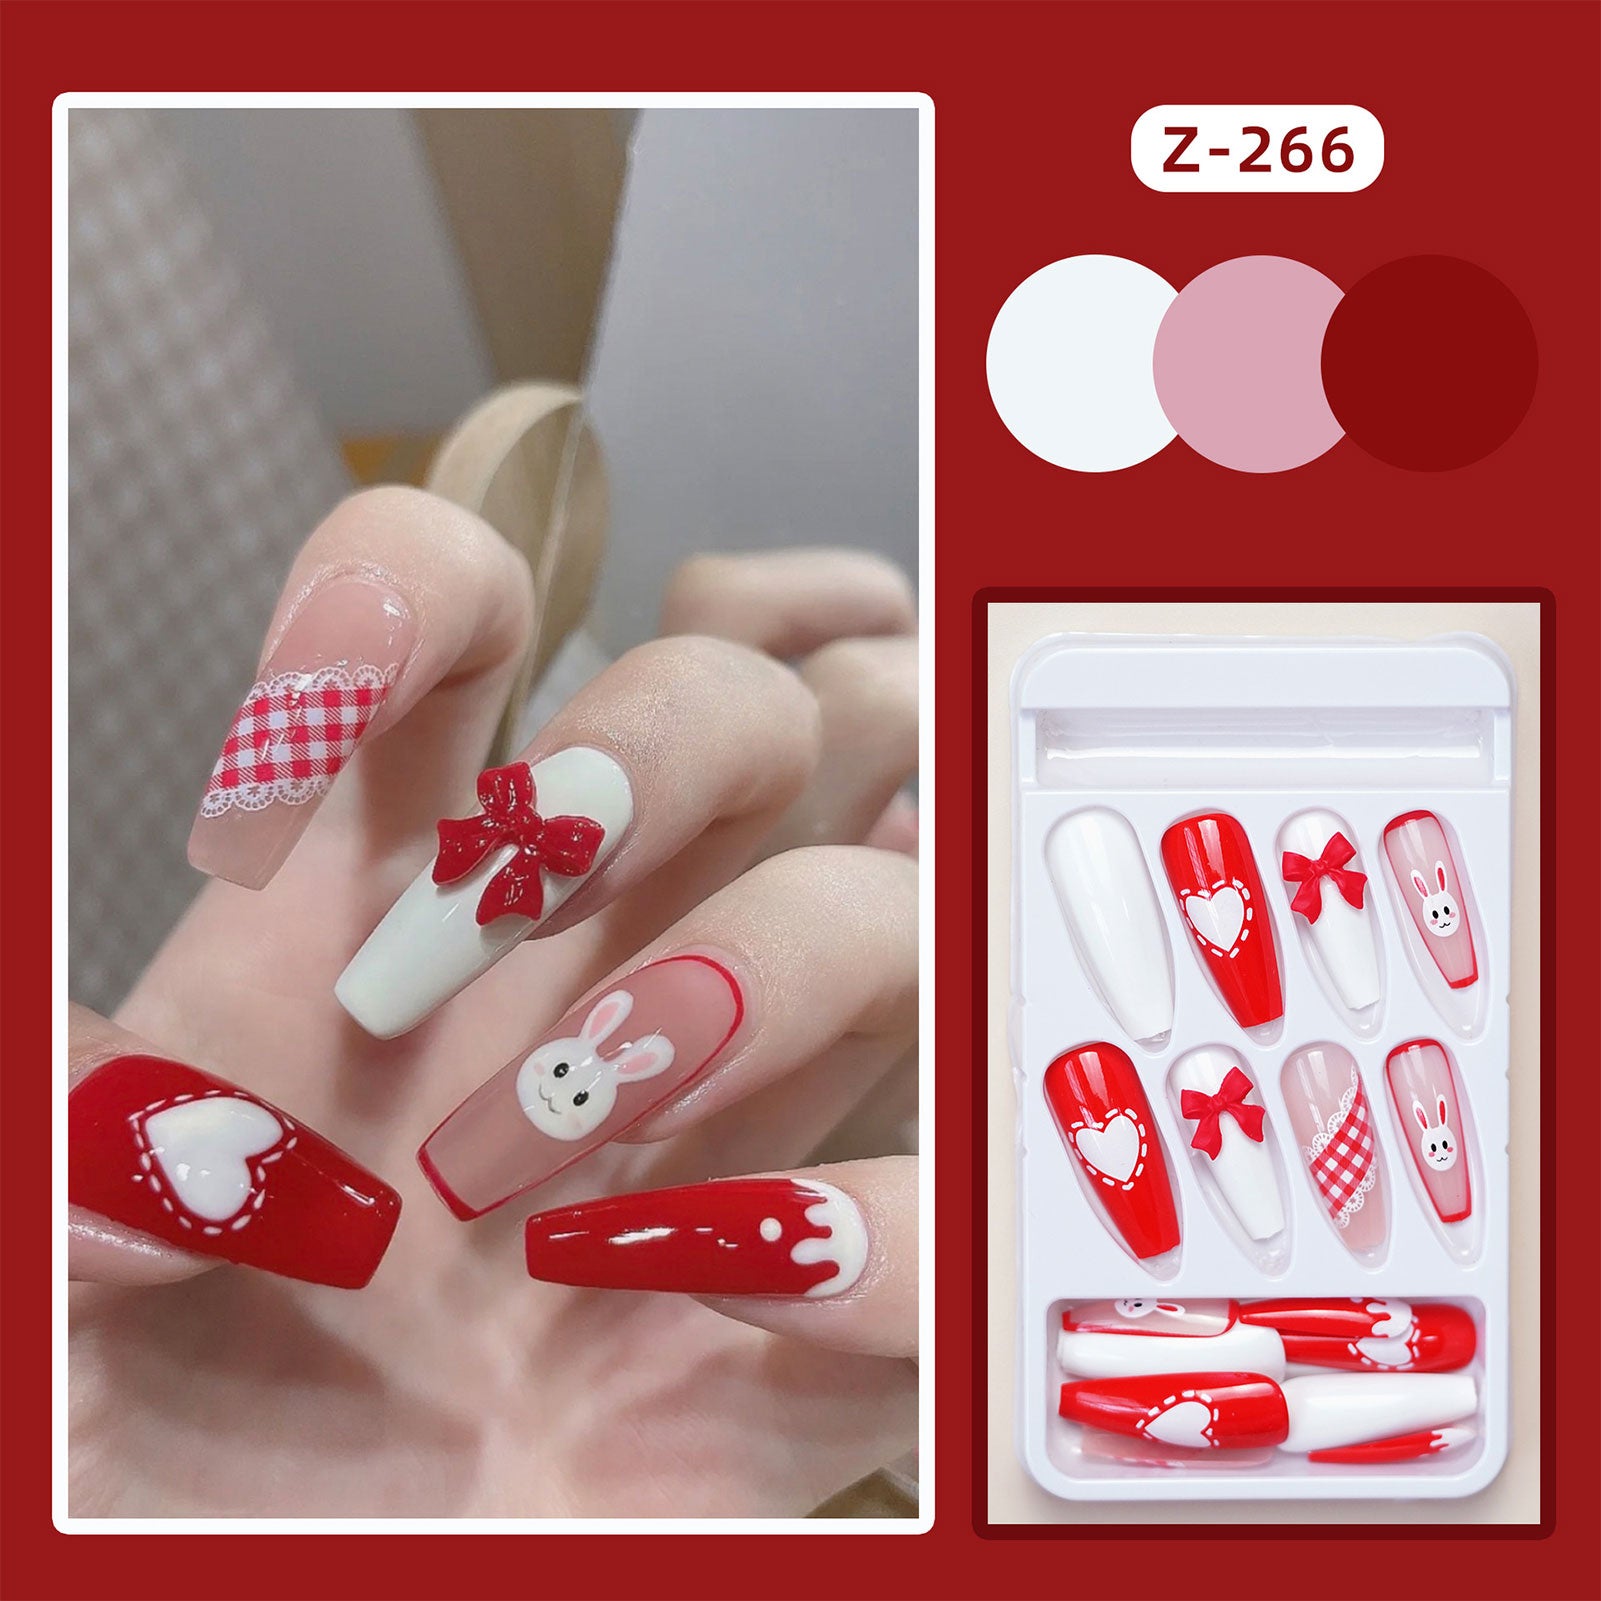 Flytonn 24pcs Rococo Style Fake Nails Press On y2k With Cute Animal Pattern Rabbit Designs French False Nail Stickers Manicure Nail Tips